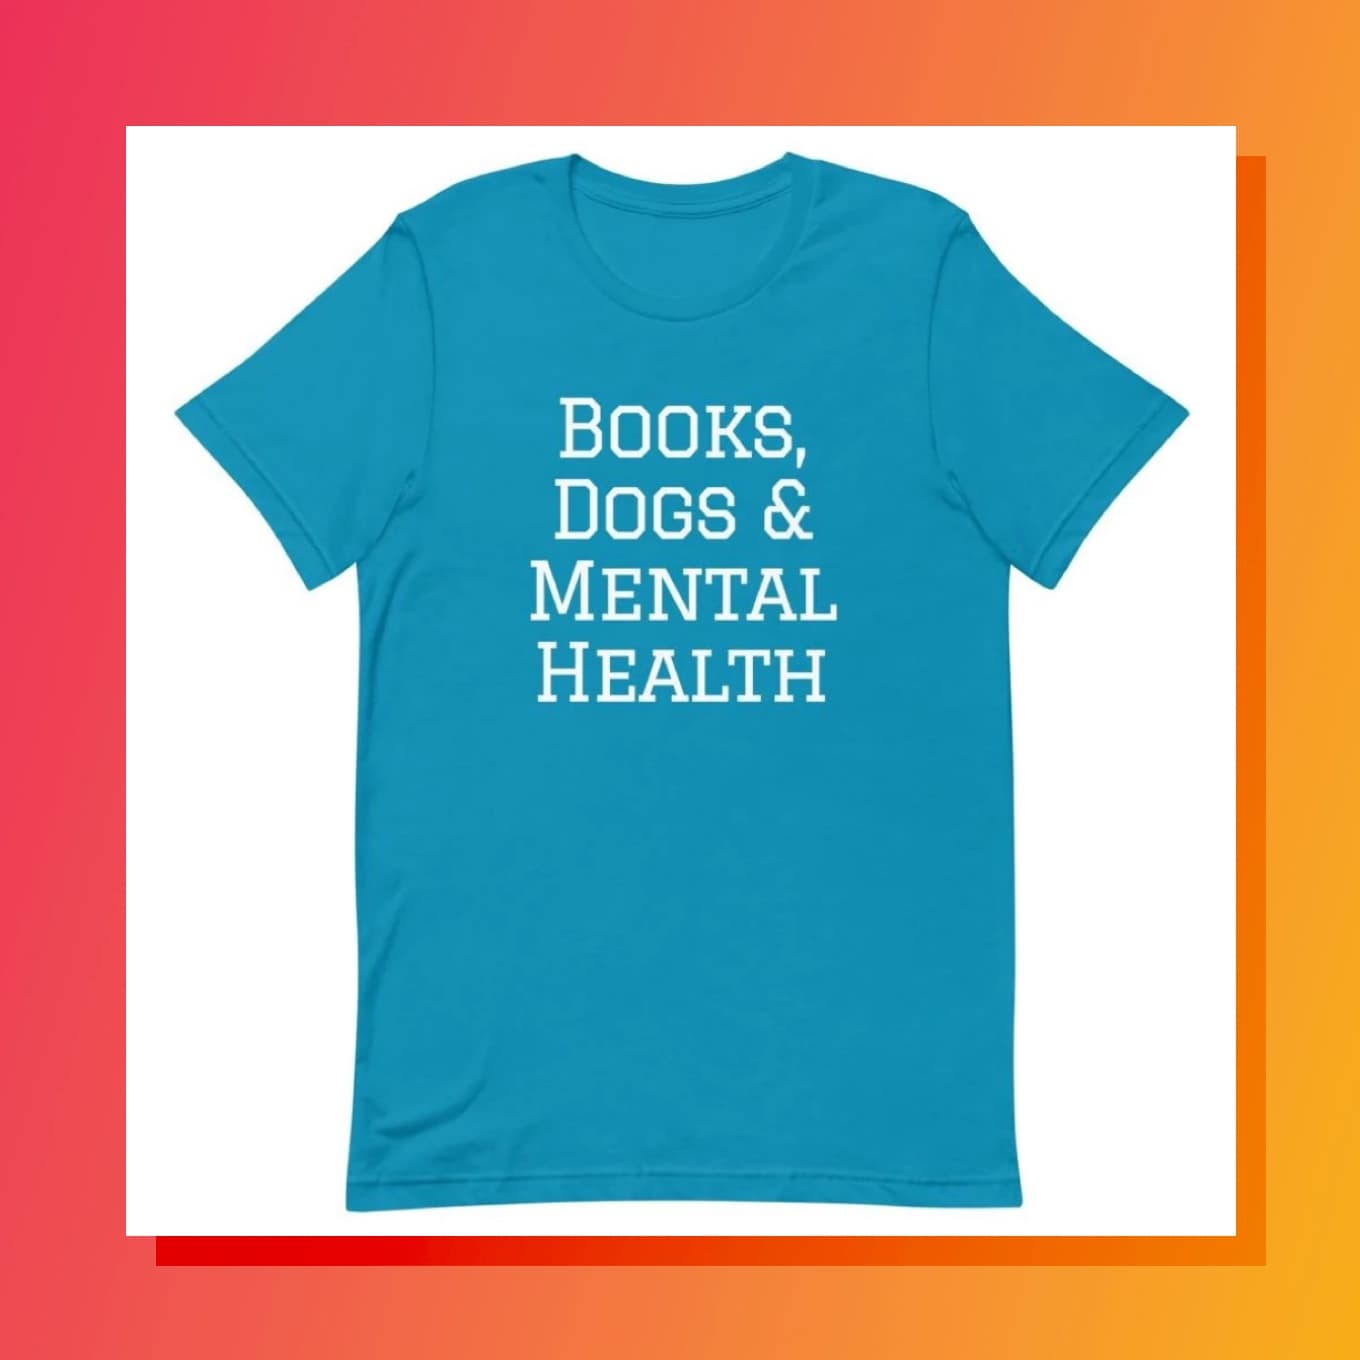 Shirt that says: Books, Dogs, Mental Health